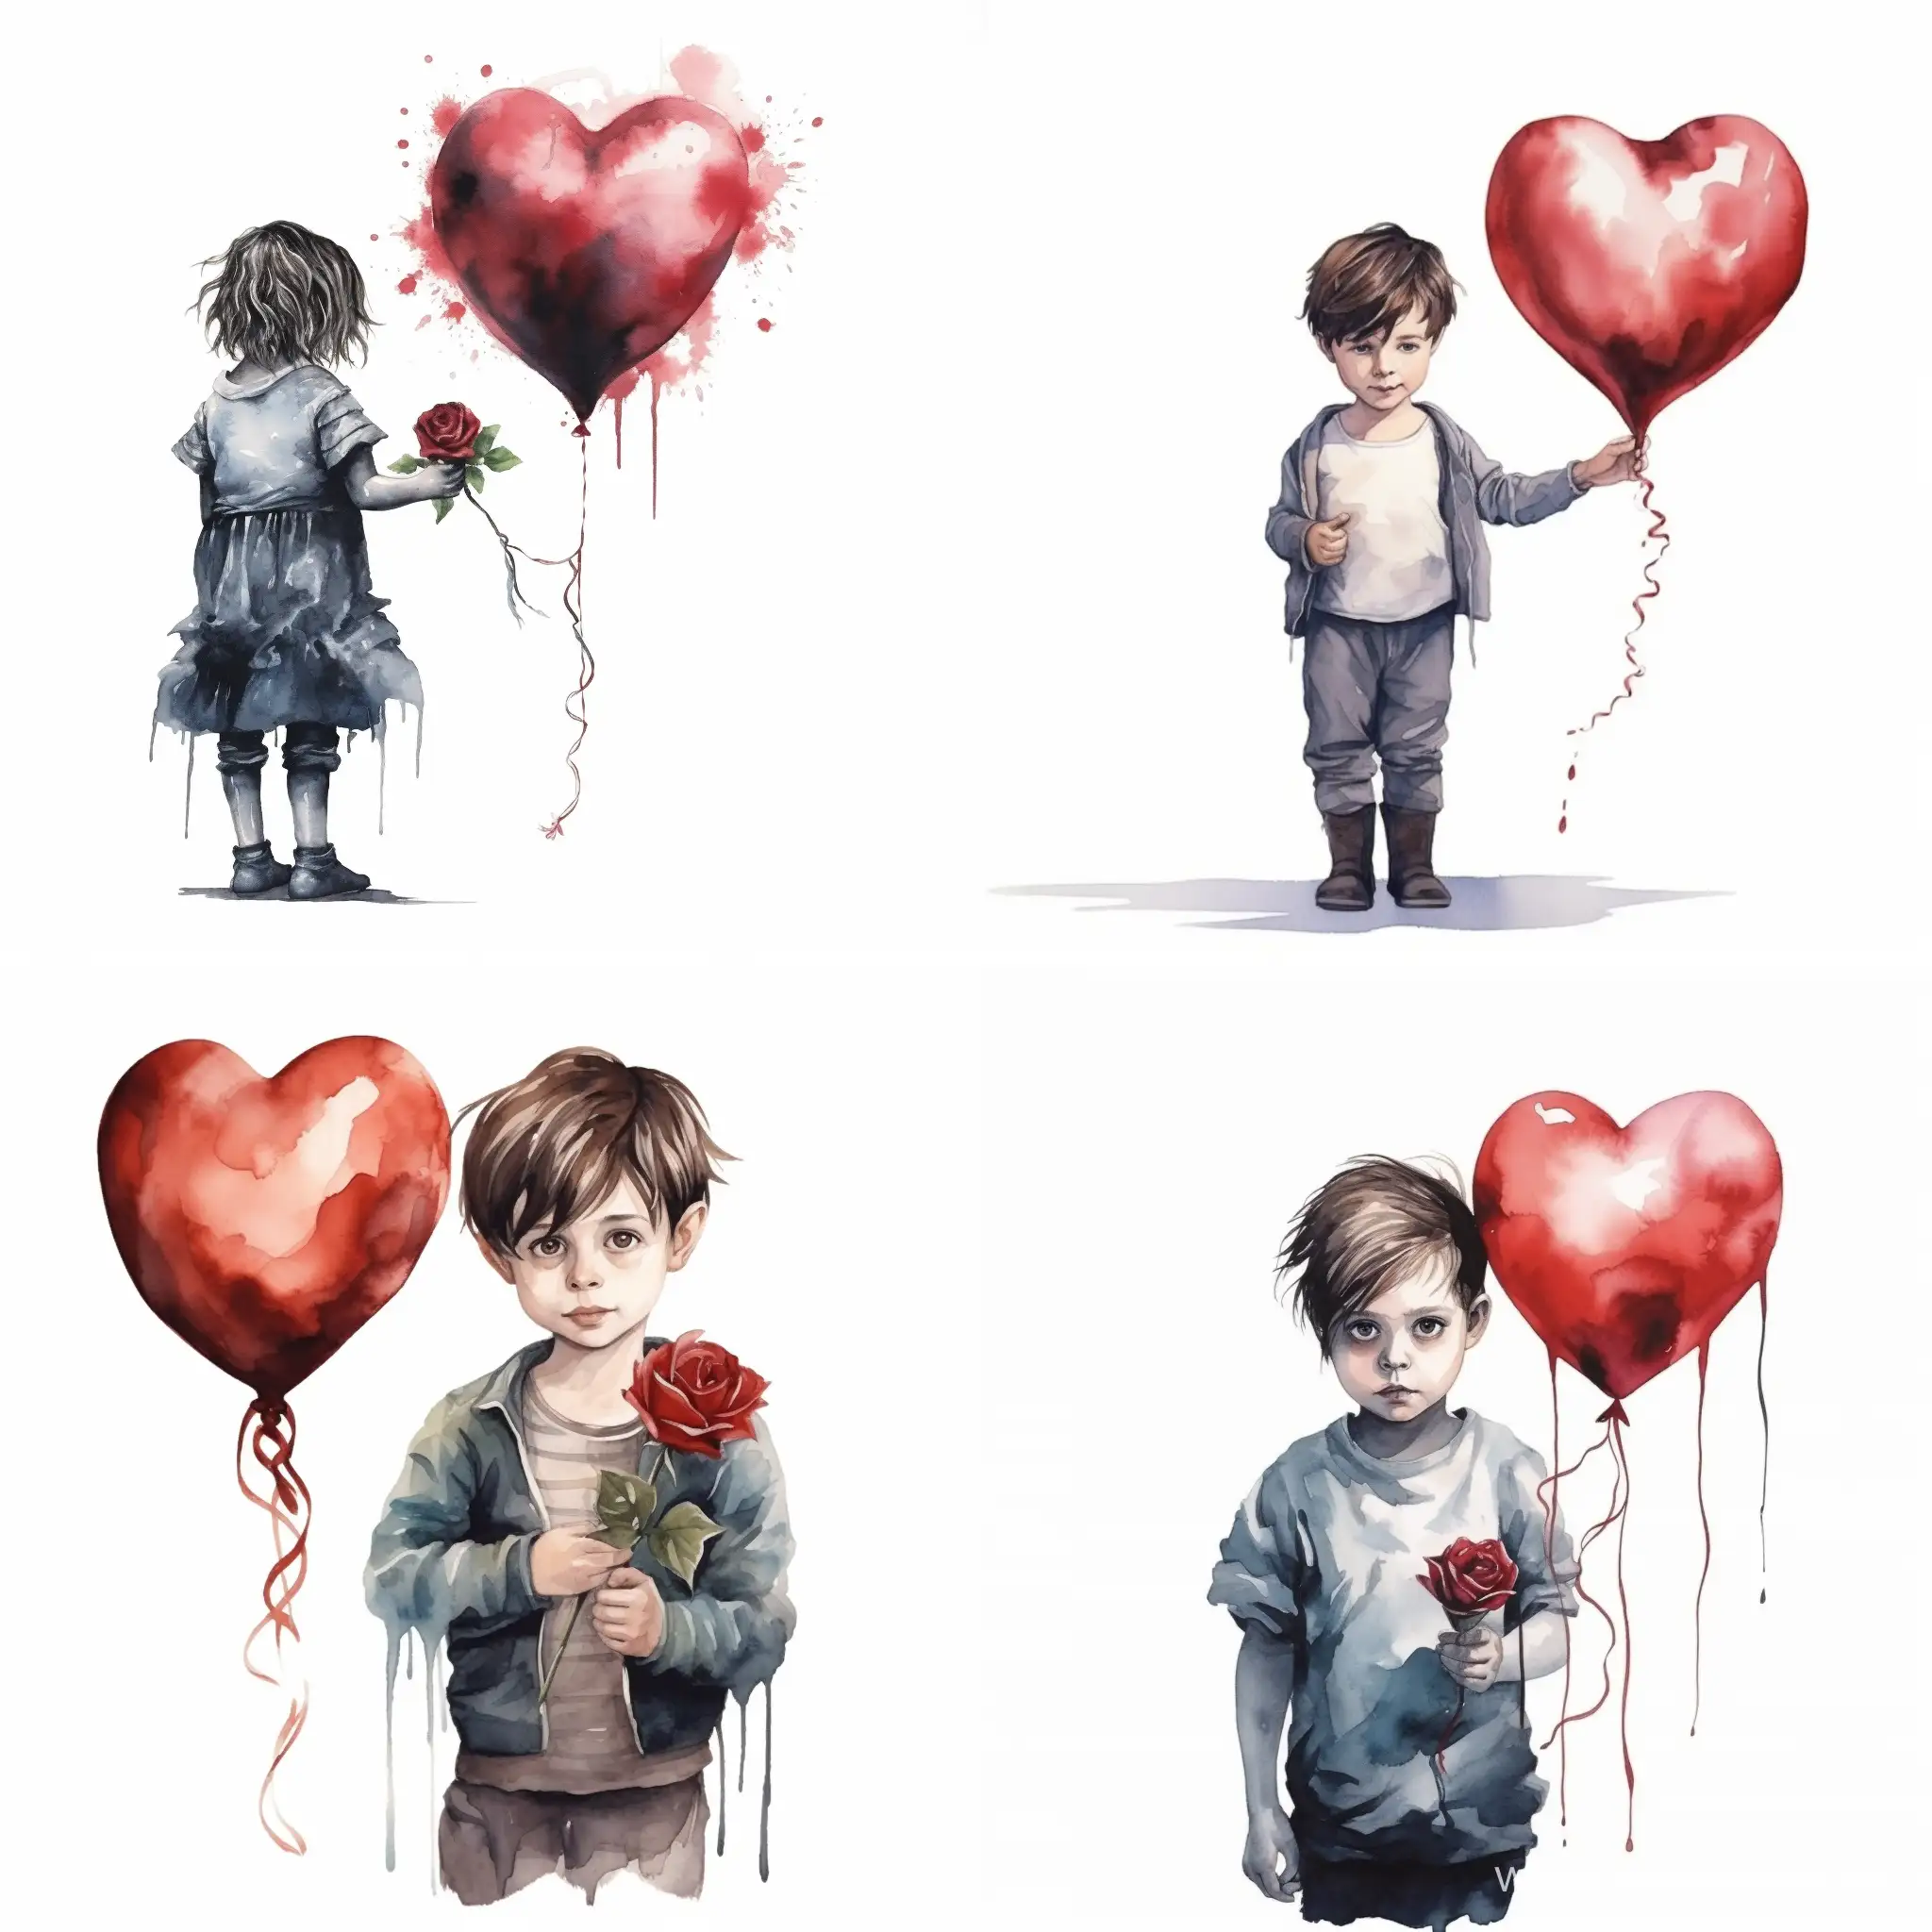 Creepy-Child-with-Heart-Balloon-and-Rose-in-Fantasy-Watercolor-Art